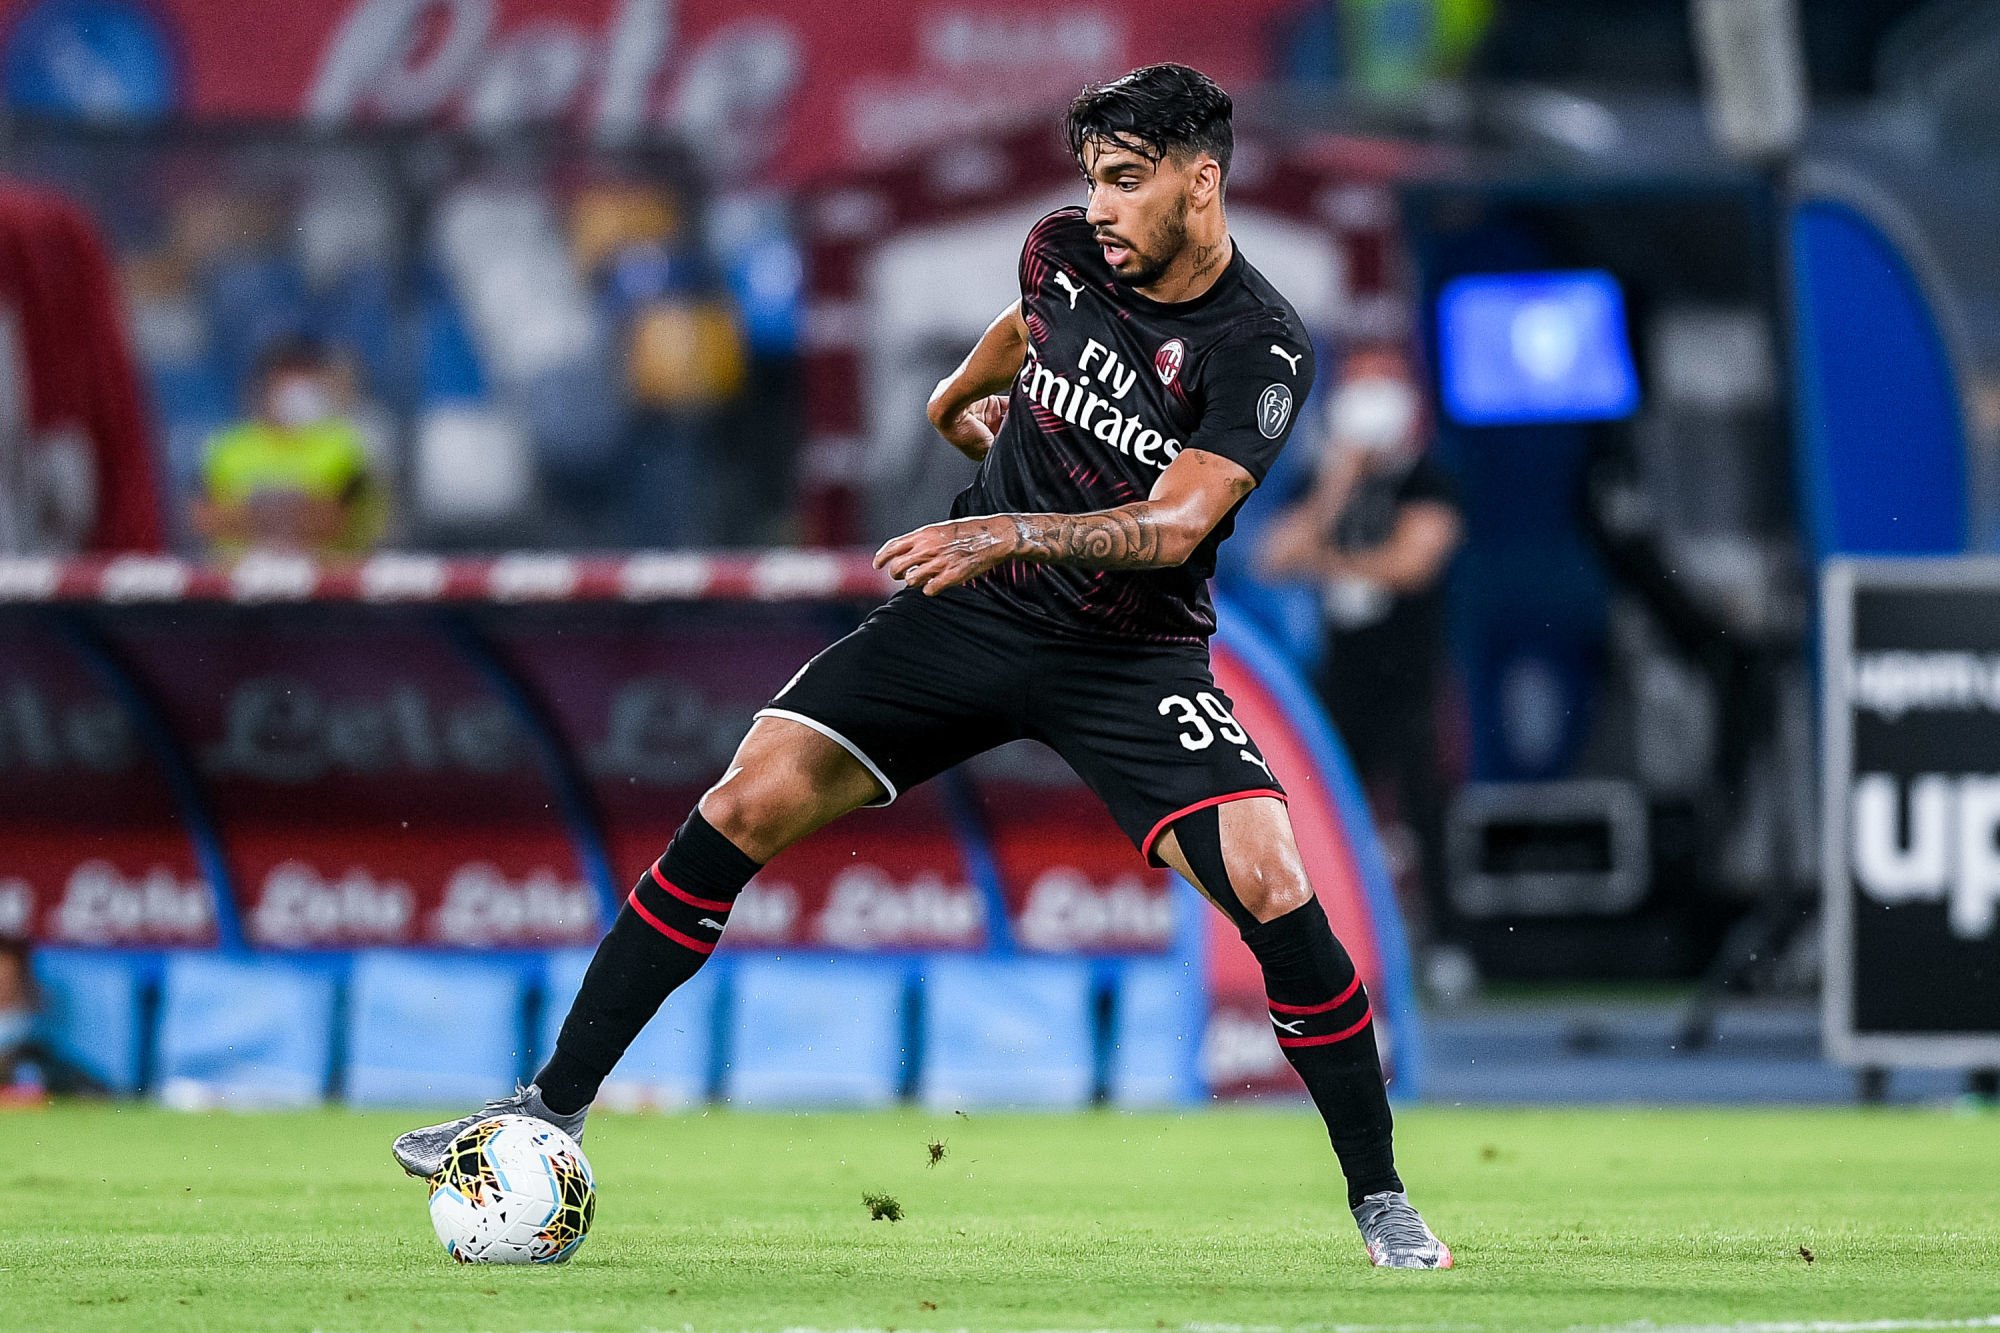 Lucas Paqueta of AC Milan during the Serie A match between Napoli and AC Milan at Stadio San Paolo, Naples, Italy on 12 July 2020. Photo by Giuseppe Maffia.
PILKA NOZNA SEZON 2019/2020 LIGA WLOSKA
FOT. SPORTPHOTO24/NEWSPIX.PL
ENGLAND OUT!
---
Newspix.pl 

Photo by Icon Sport - Stade San Paolo - Naples (Italie)